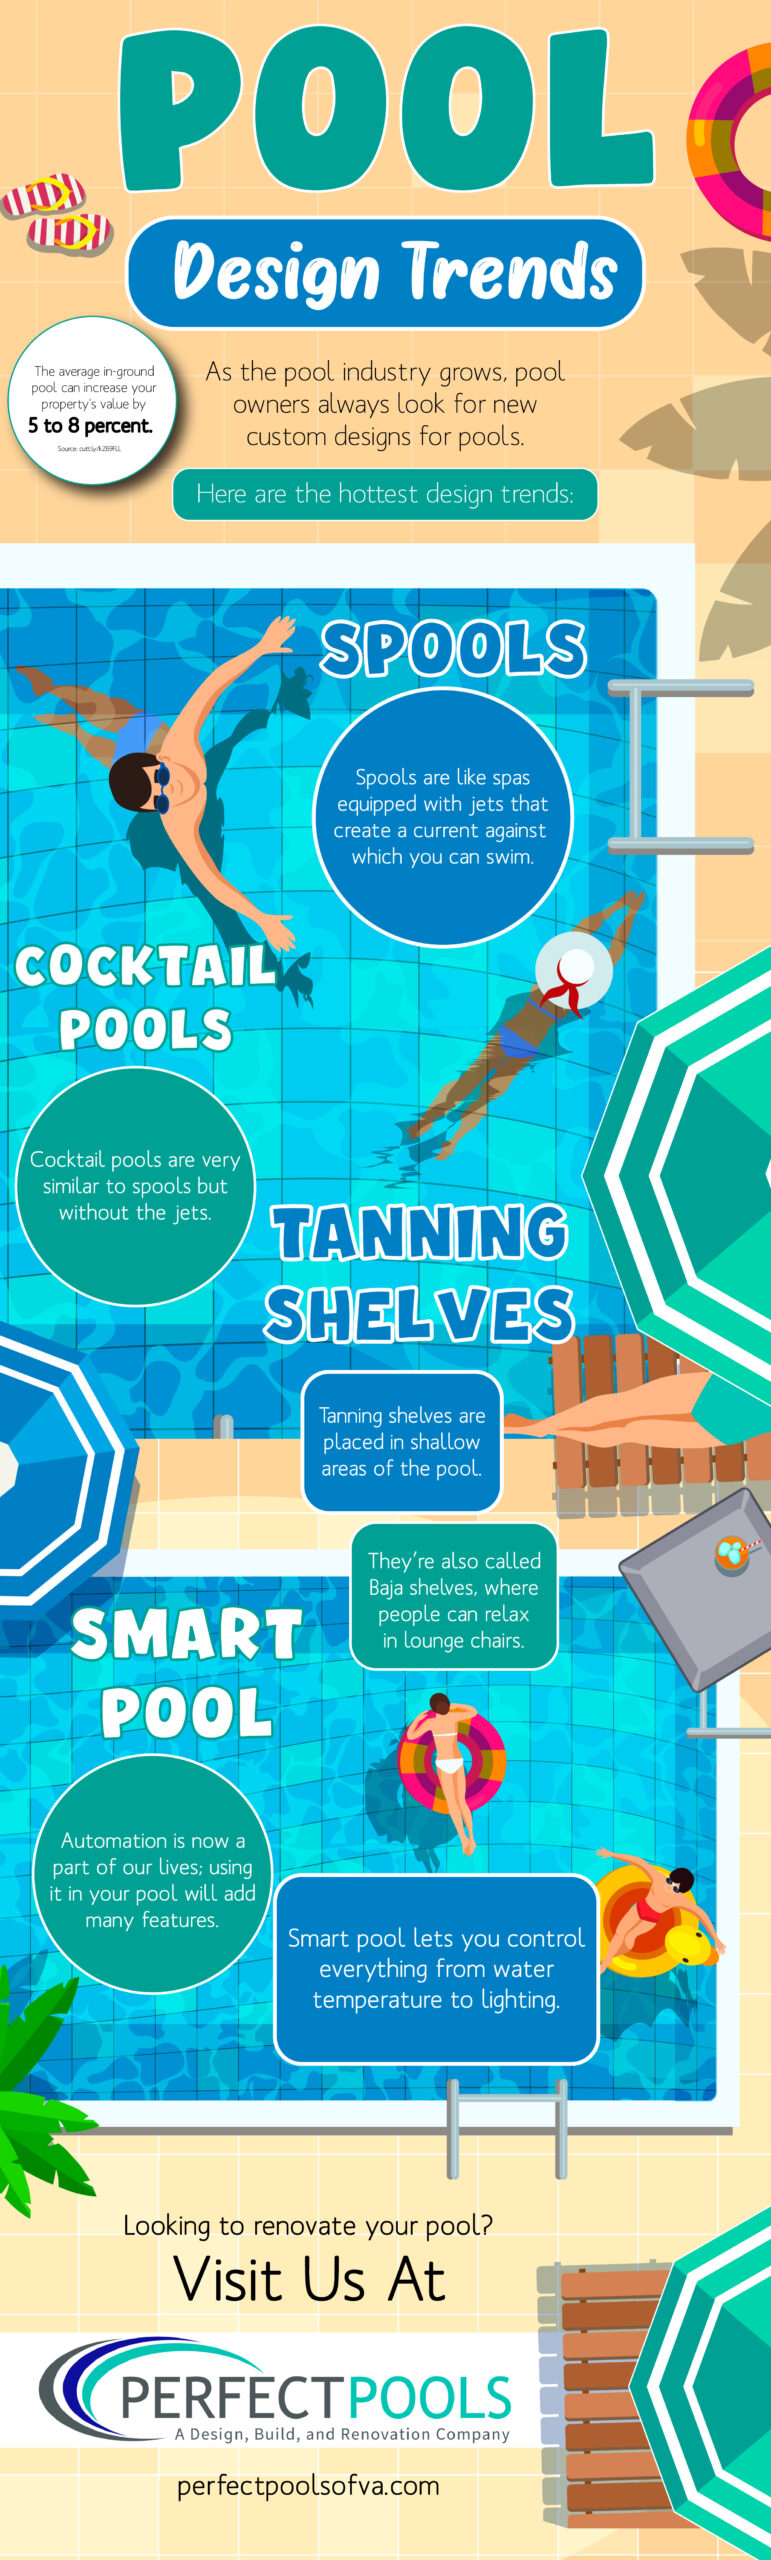 Pool Design Trends - Infograph